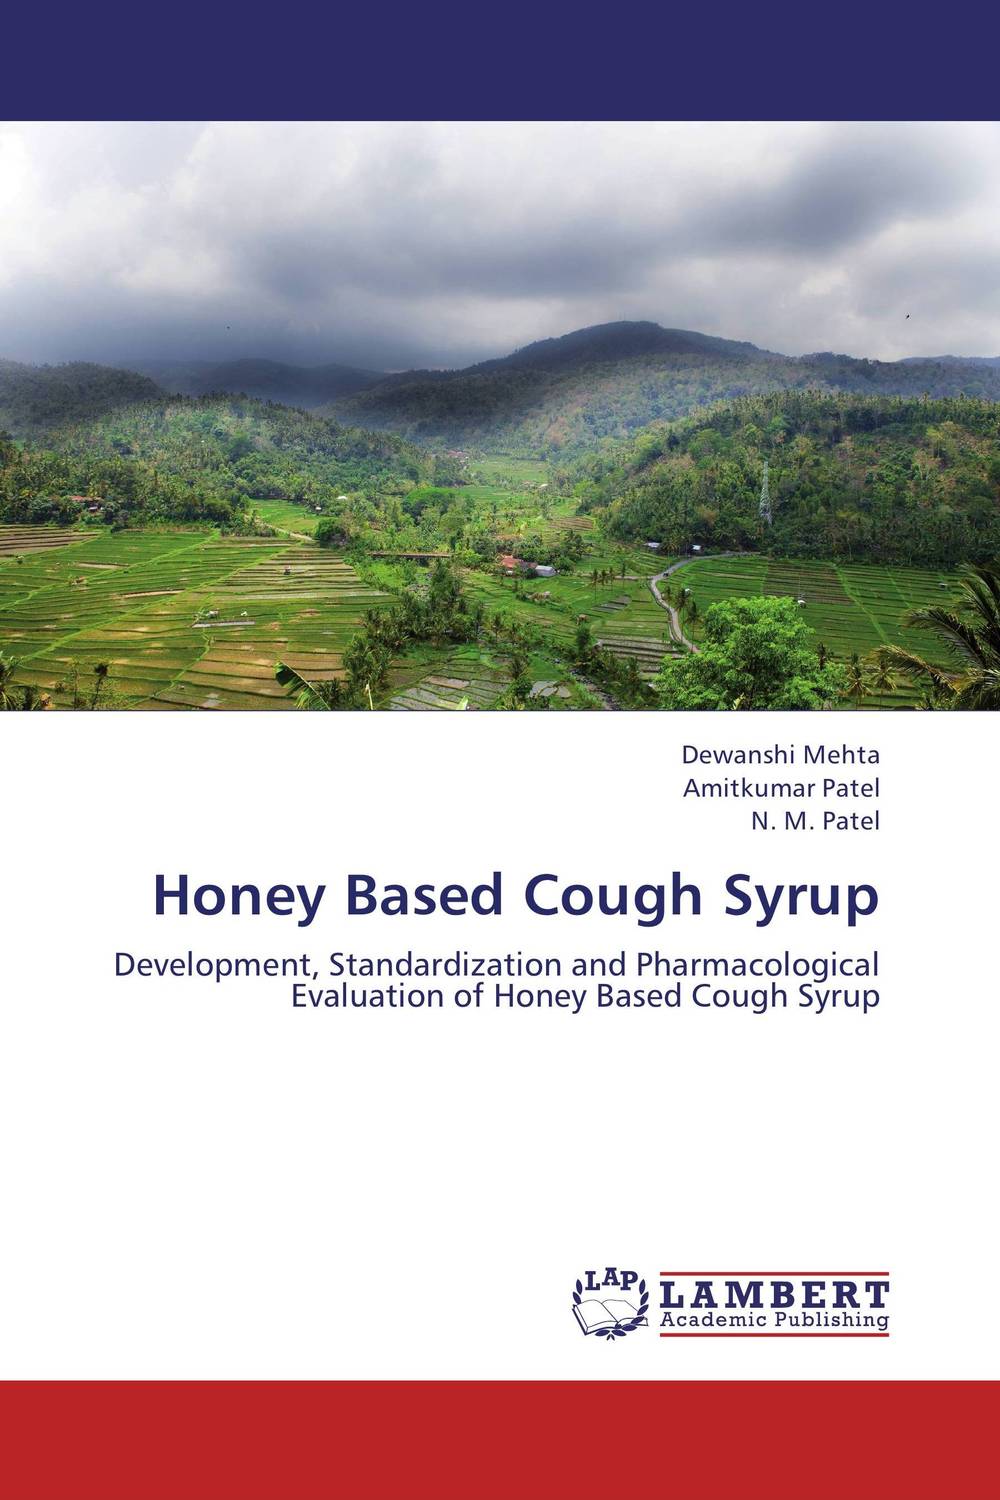 Honey Based Cough Syrup